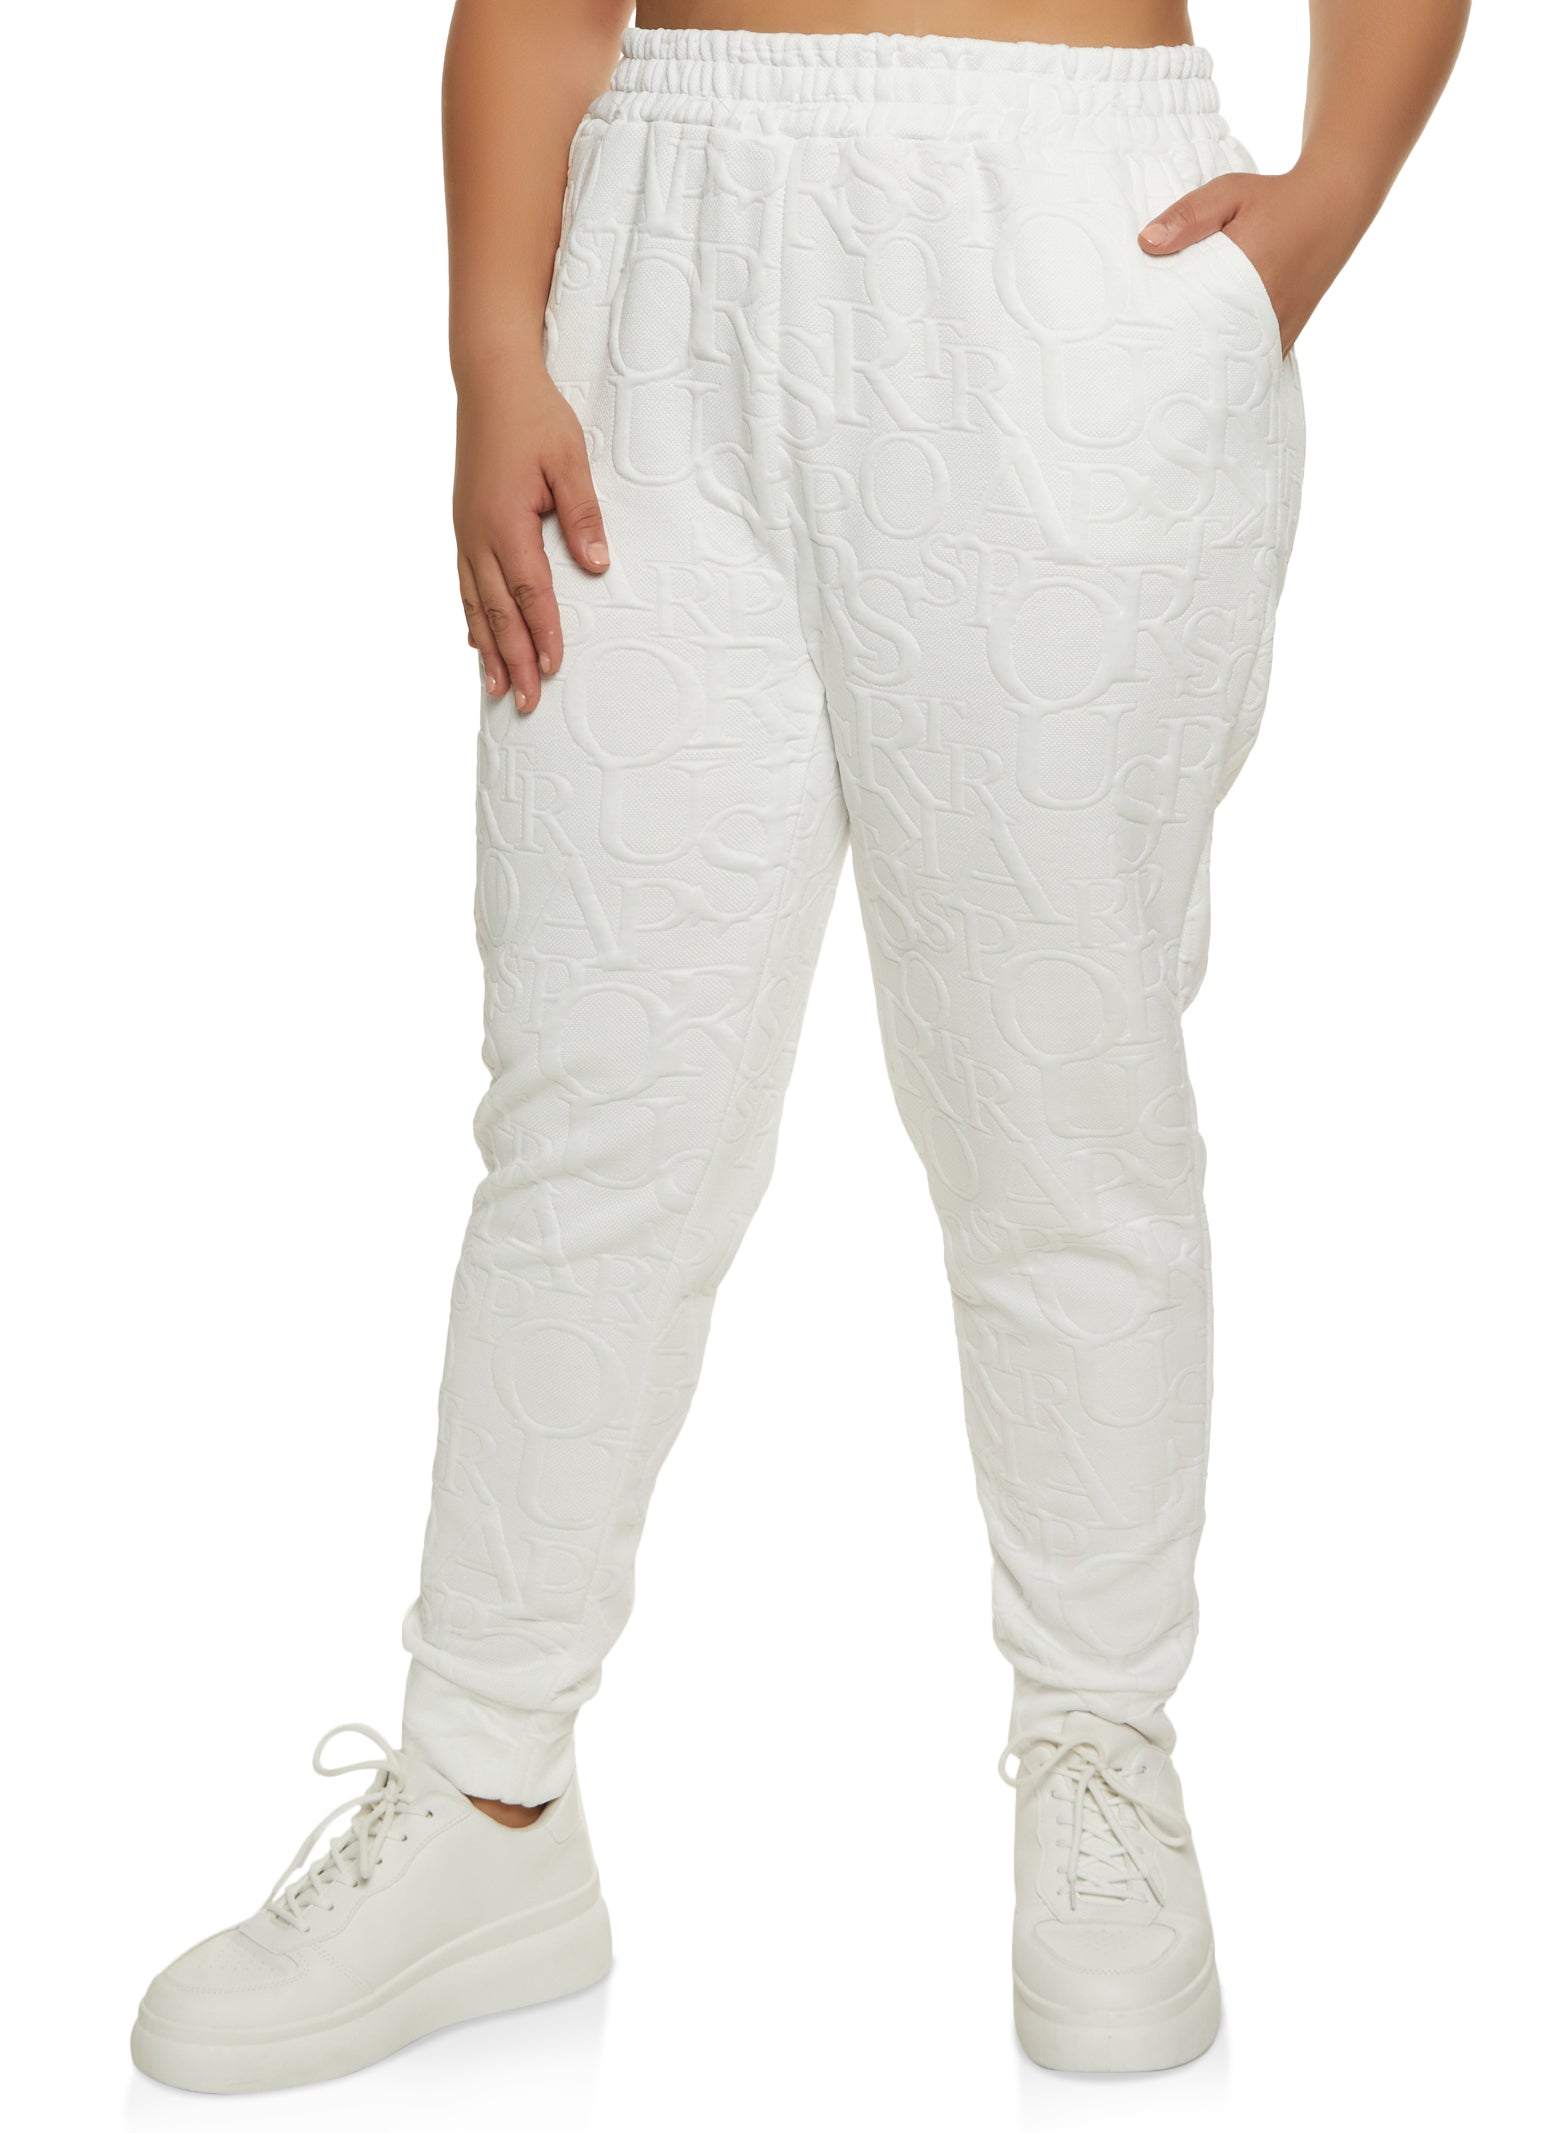 Rainbow Shops Womens Plus Size Embossed Joggers, White, Size 3X